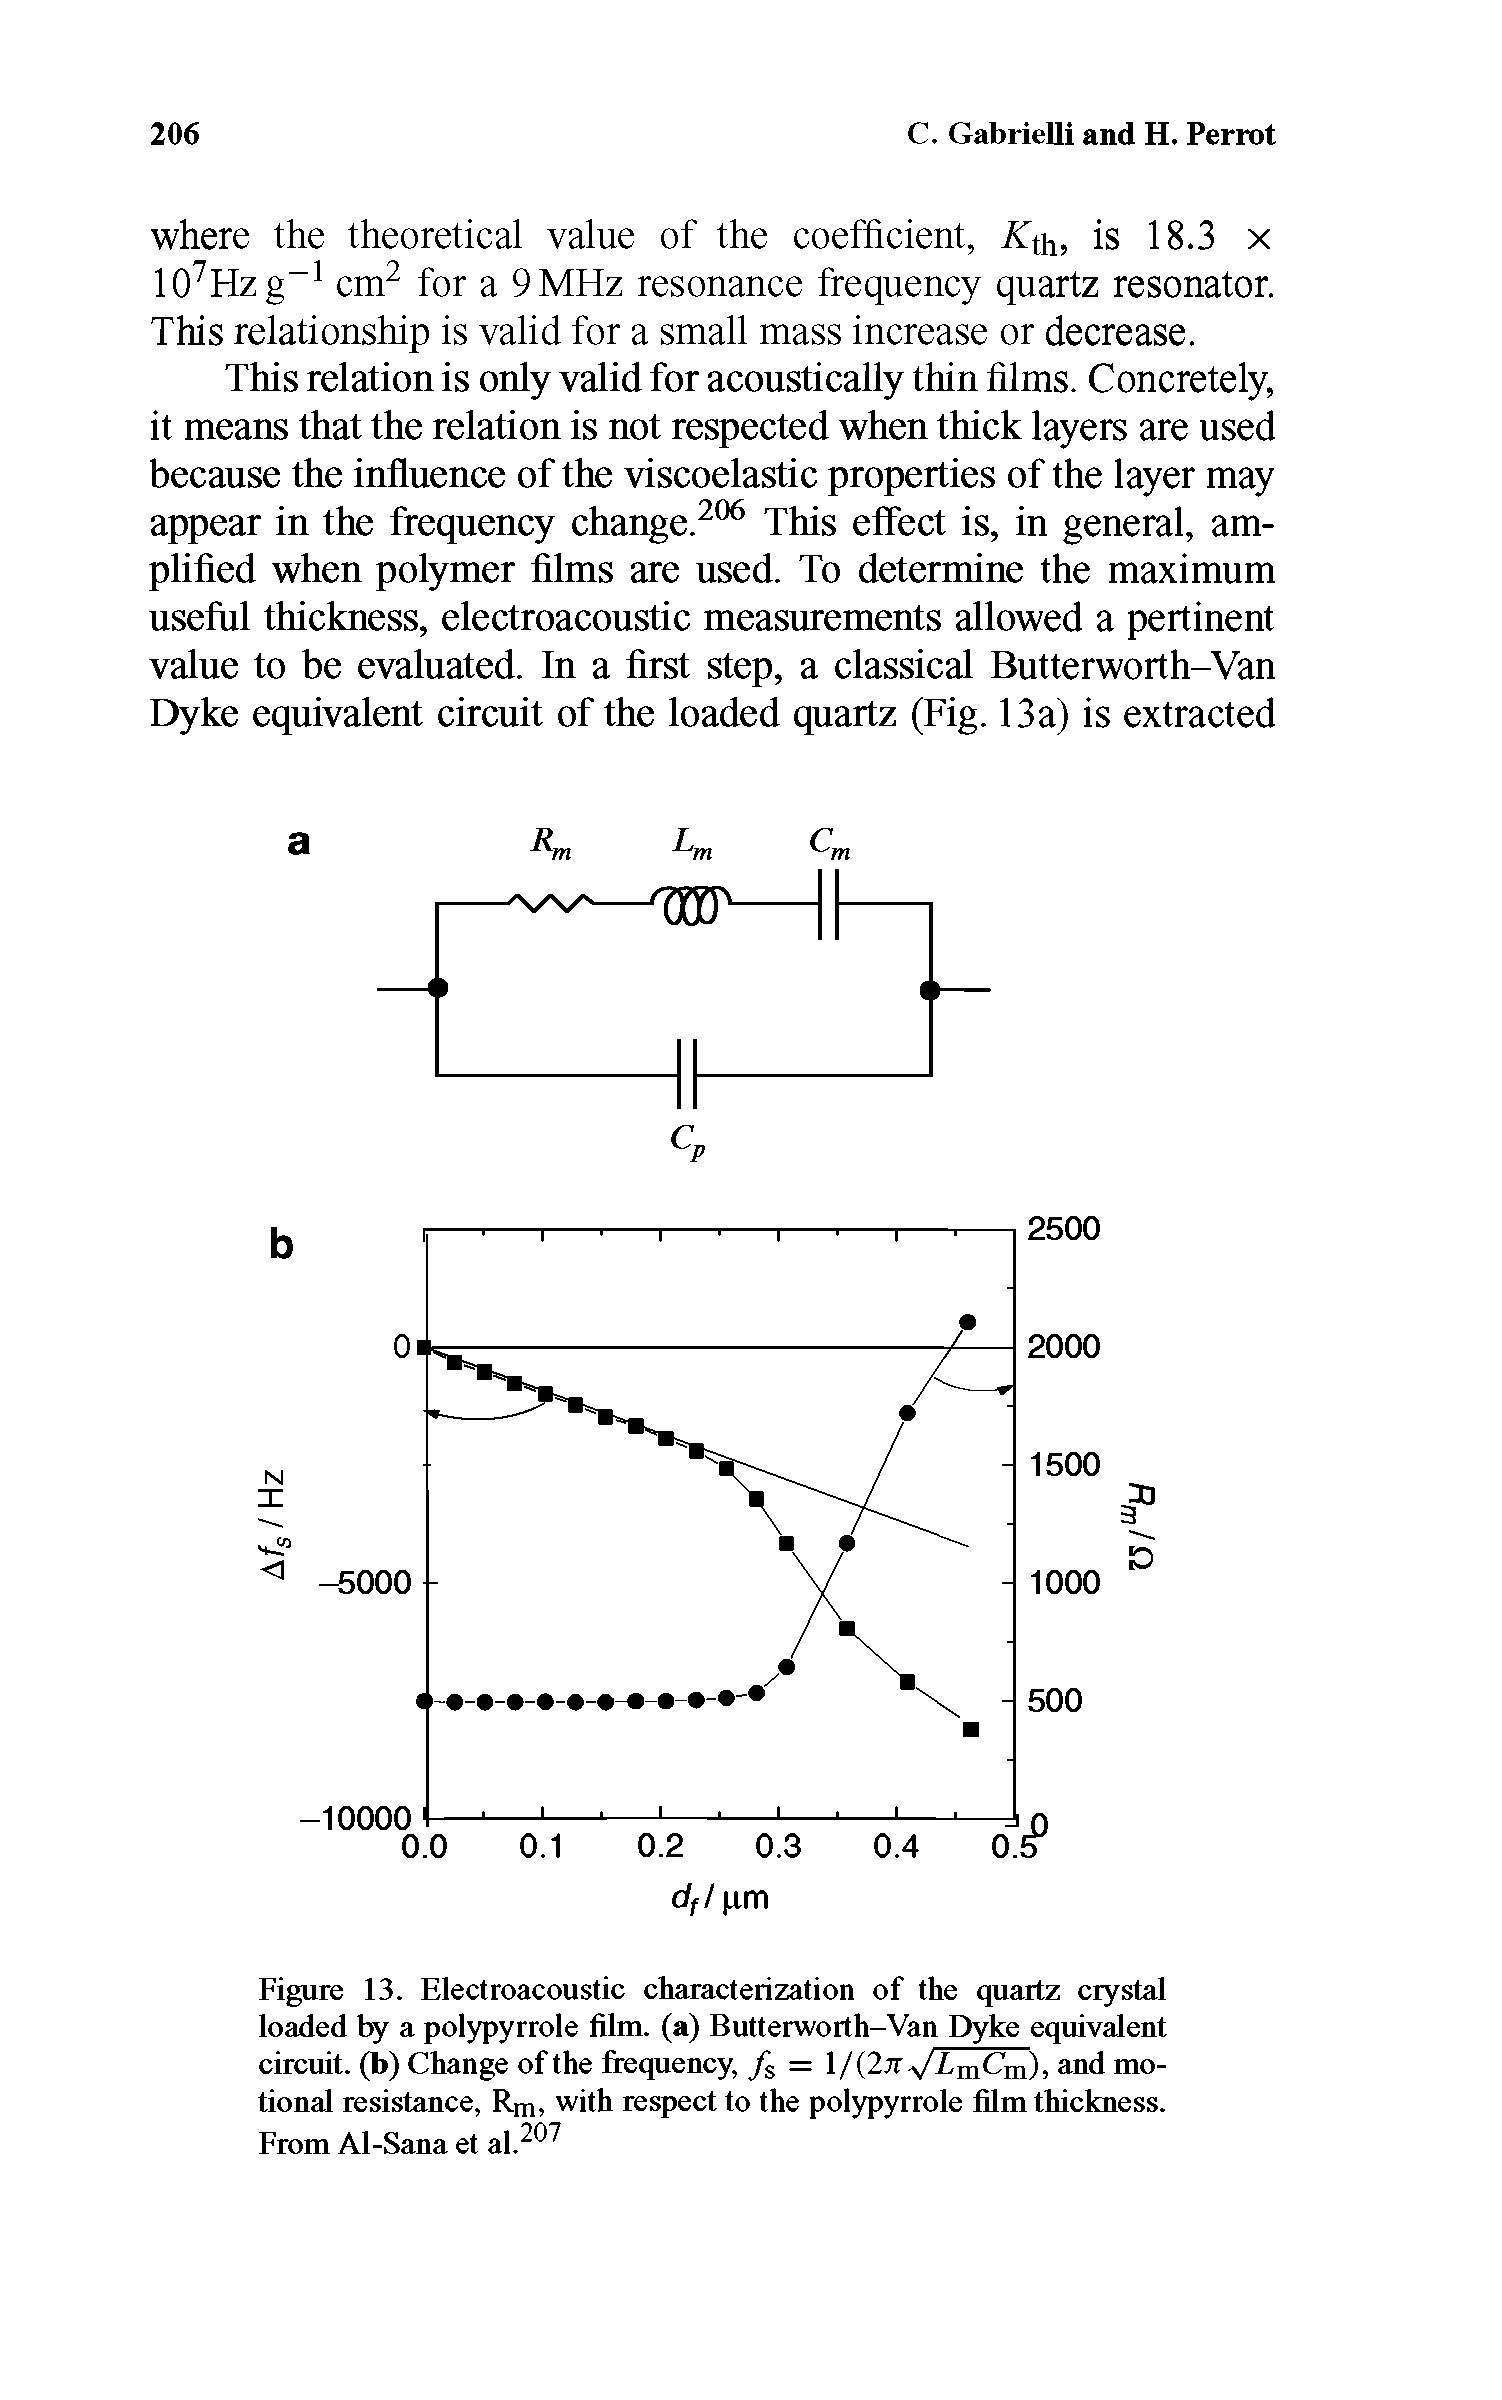 Figure 13. Electroacoustic characterization of the quartz crystal loaded by a polypyrrole film, (a) Butterworth-Van Dyke equivalent circuit, (b) Change of the frequency, fs = l/(2w vTinOn), and motional resistance, Rm, with respect to the polypyrrole film thickness. From AI-Sana et al. ...